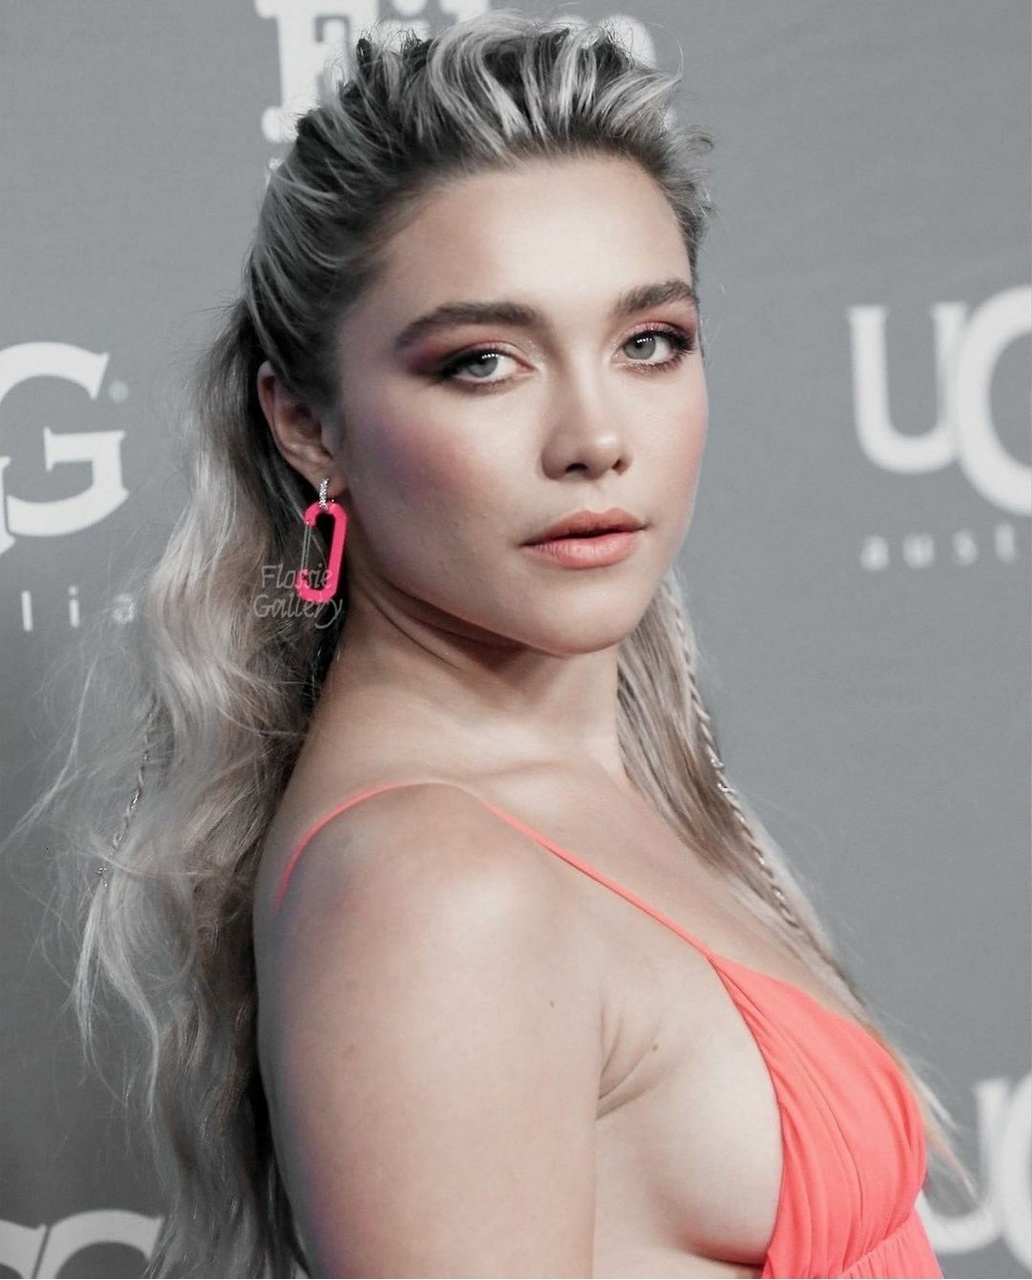 Soo Horny For Florence Pugh Anyone Wanna Chat About Her NSFW